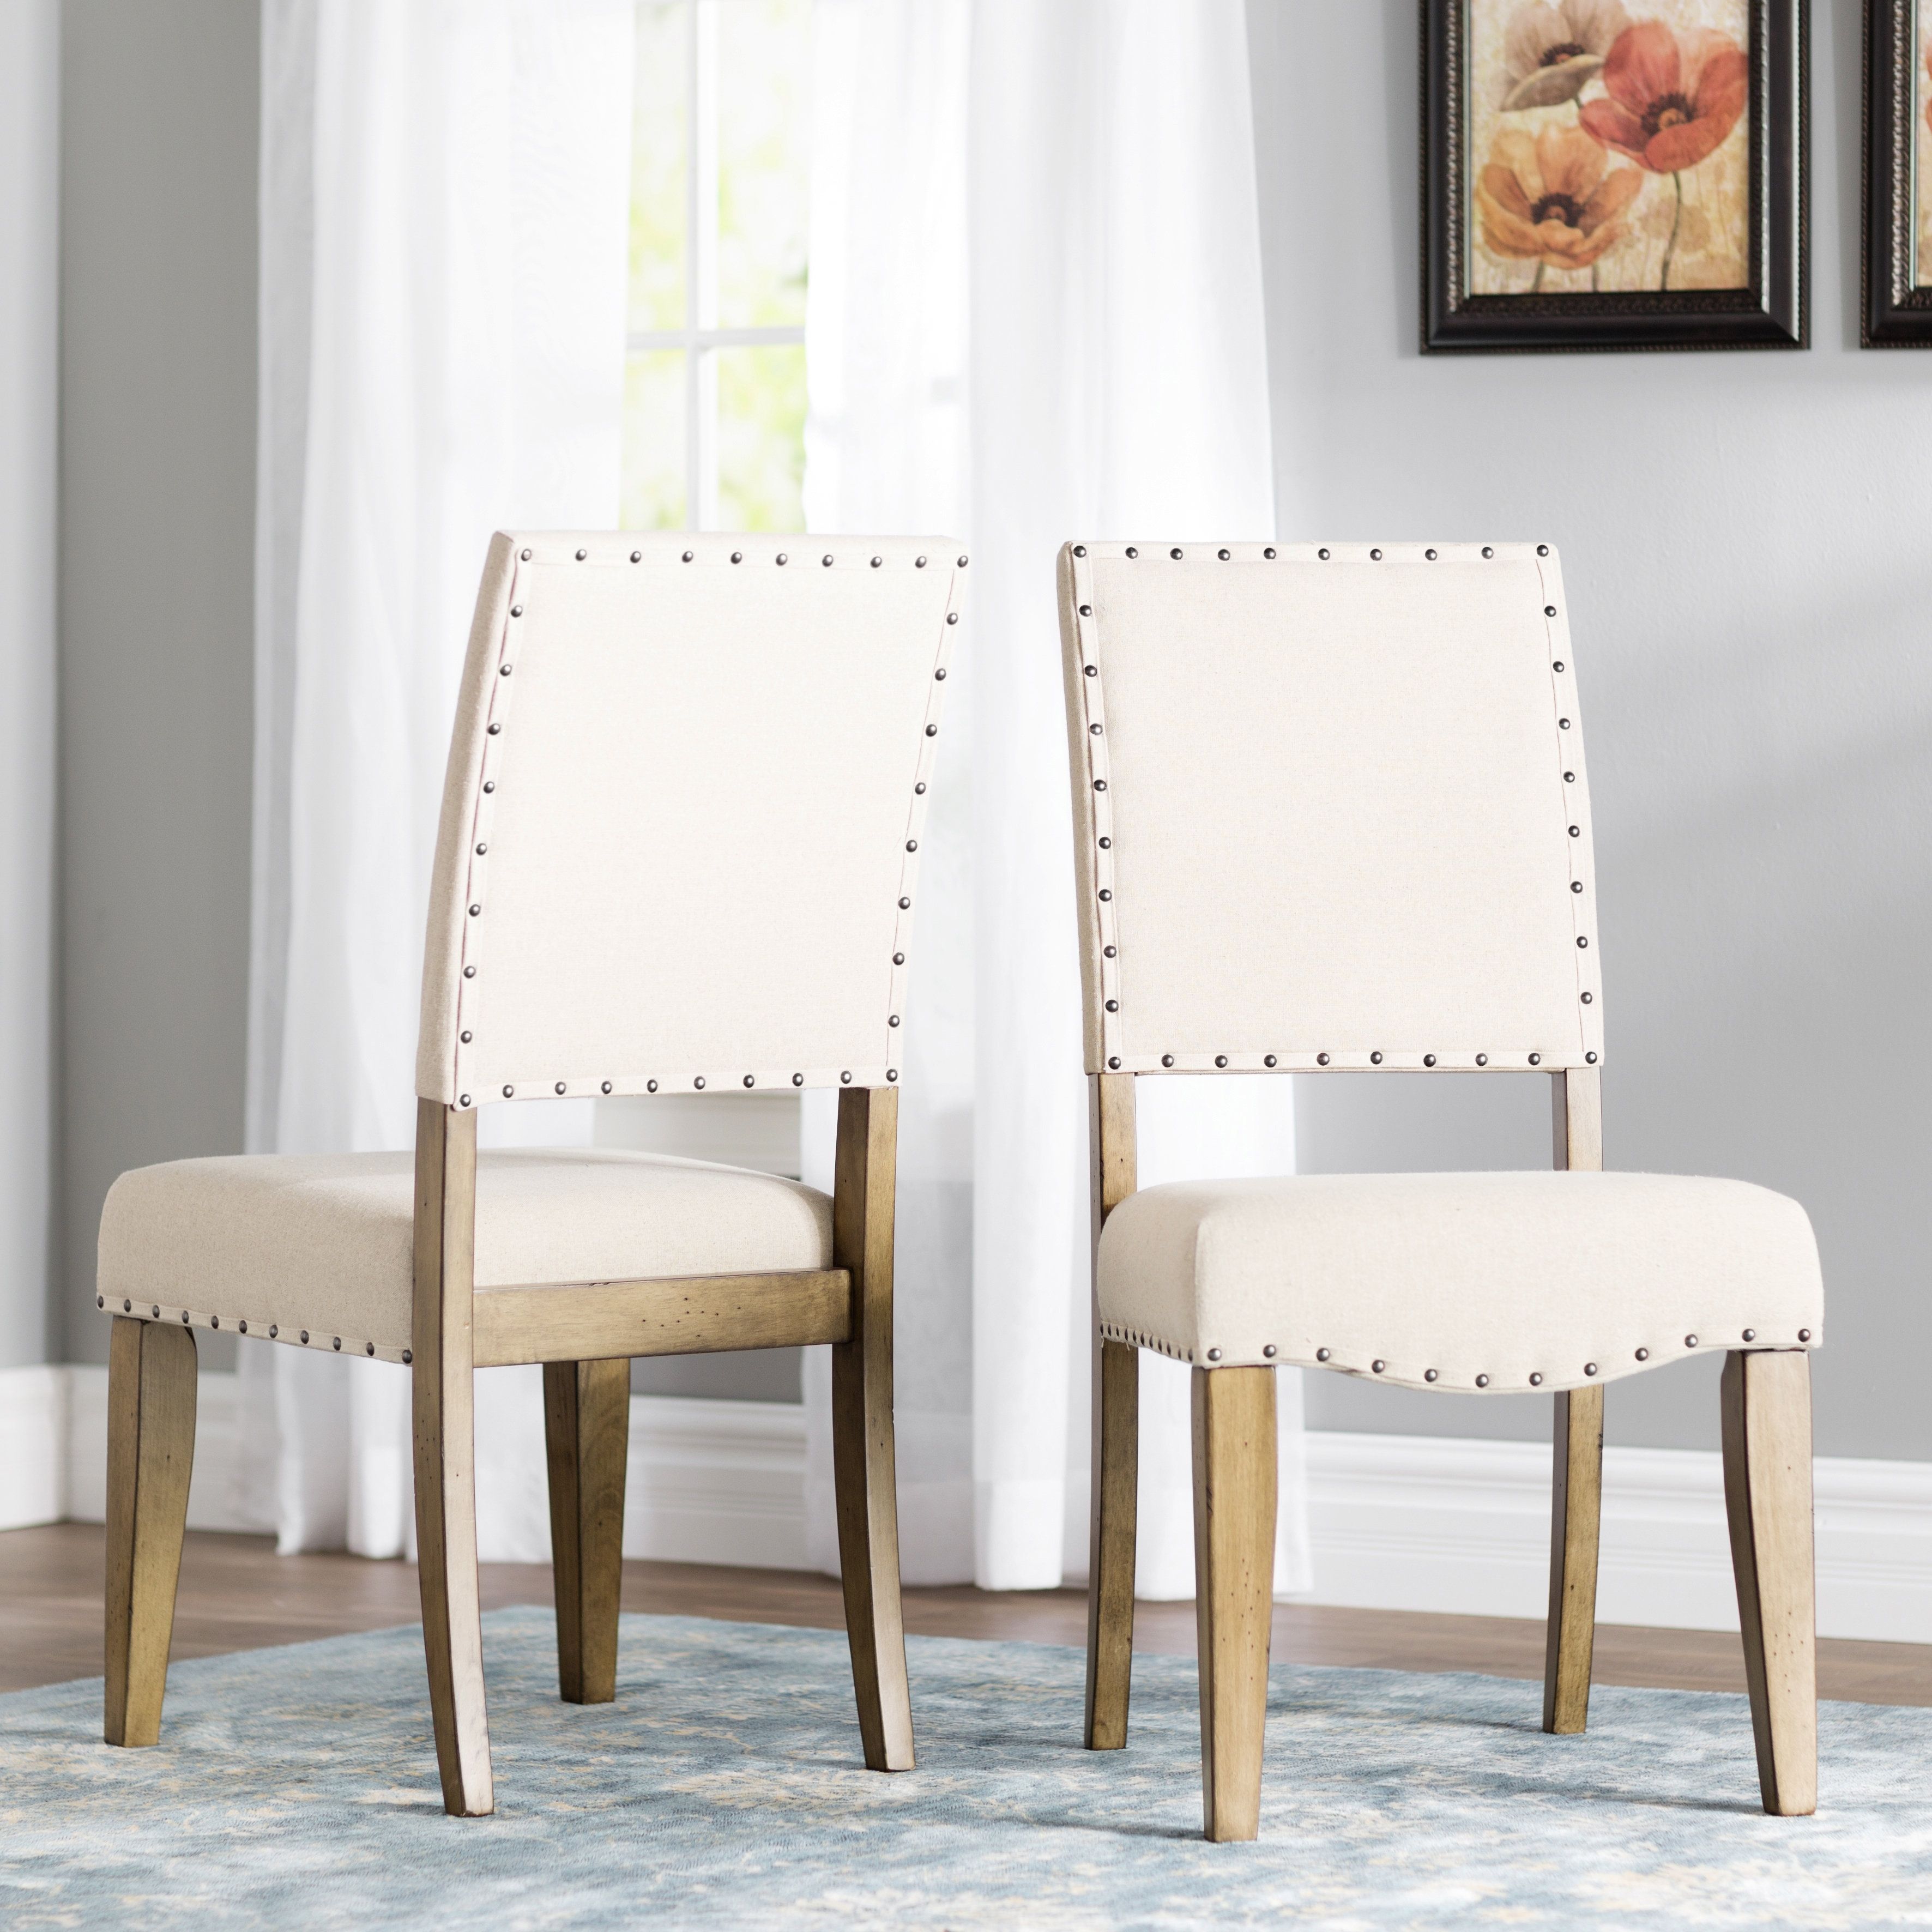 Wayfair With Regard To Favorite Candice Ii Upholstered Side Chairs (View 9 of 20)